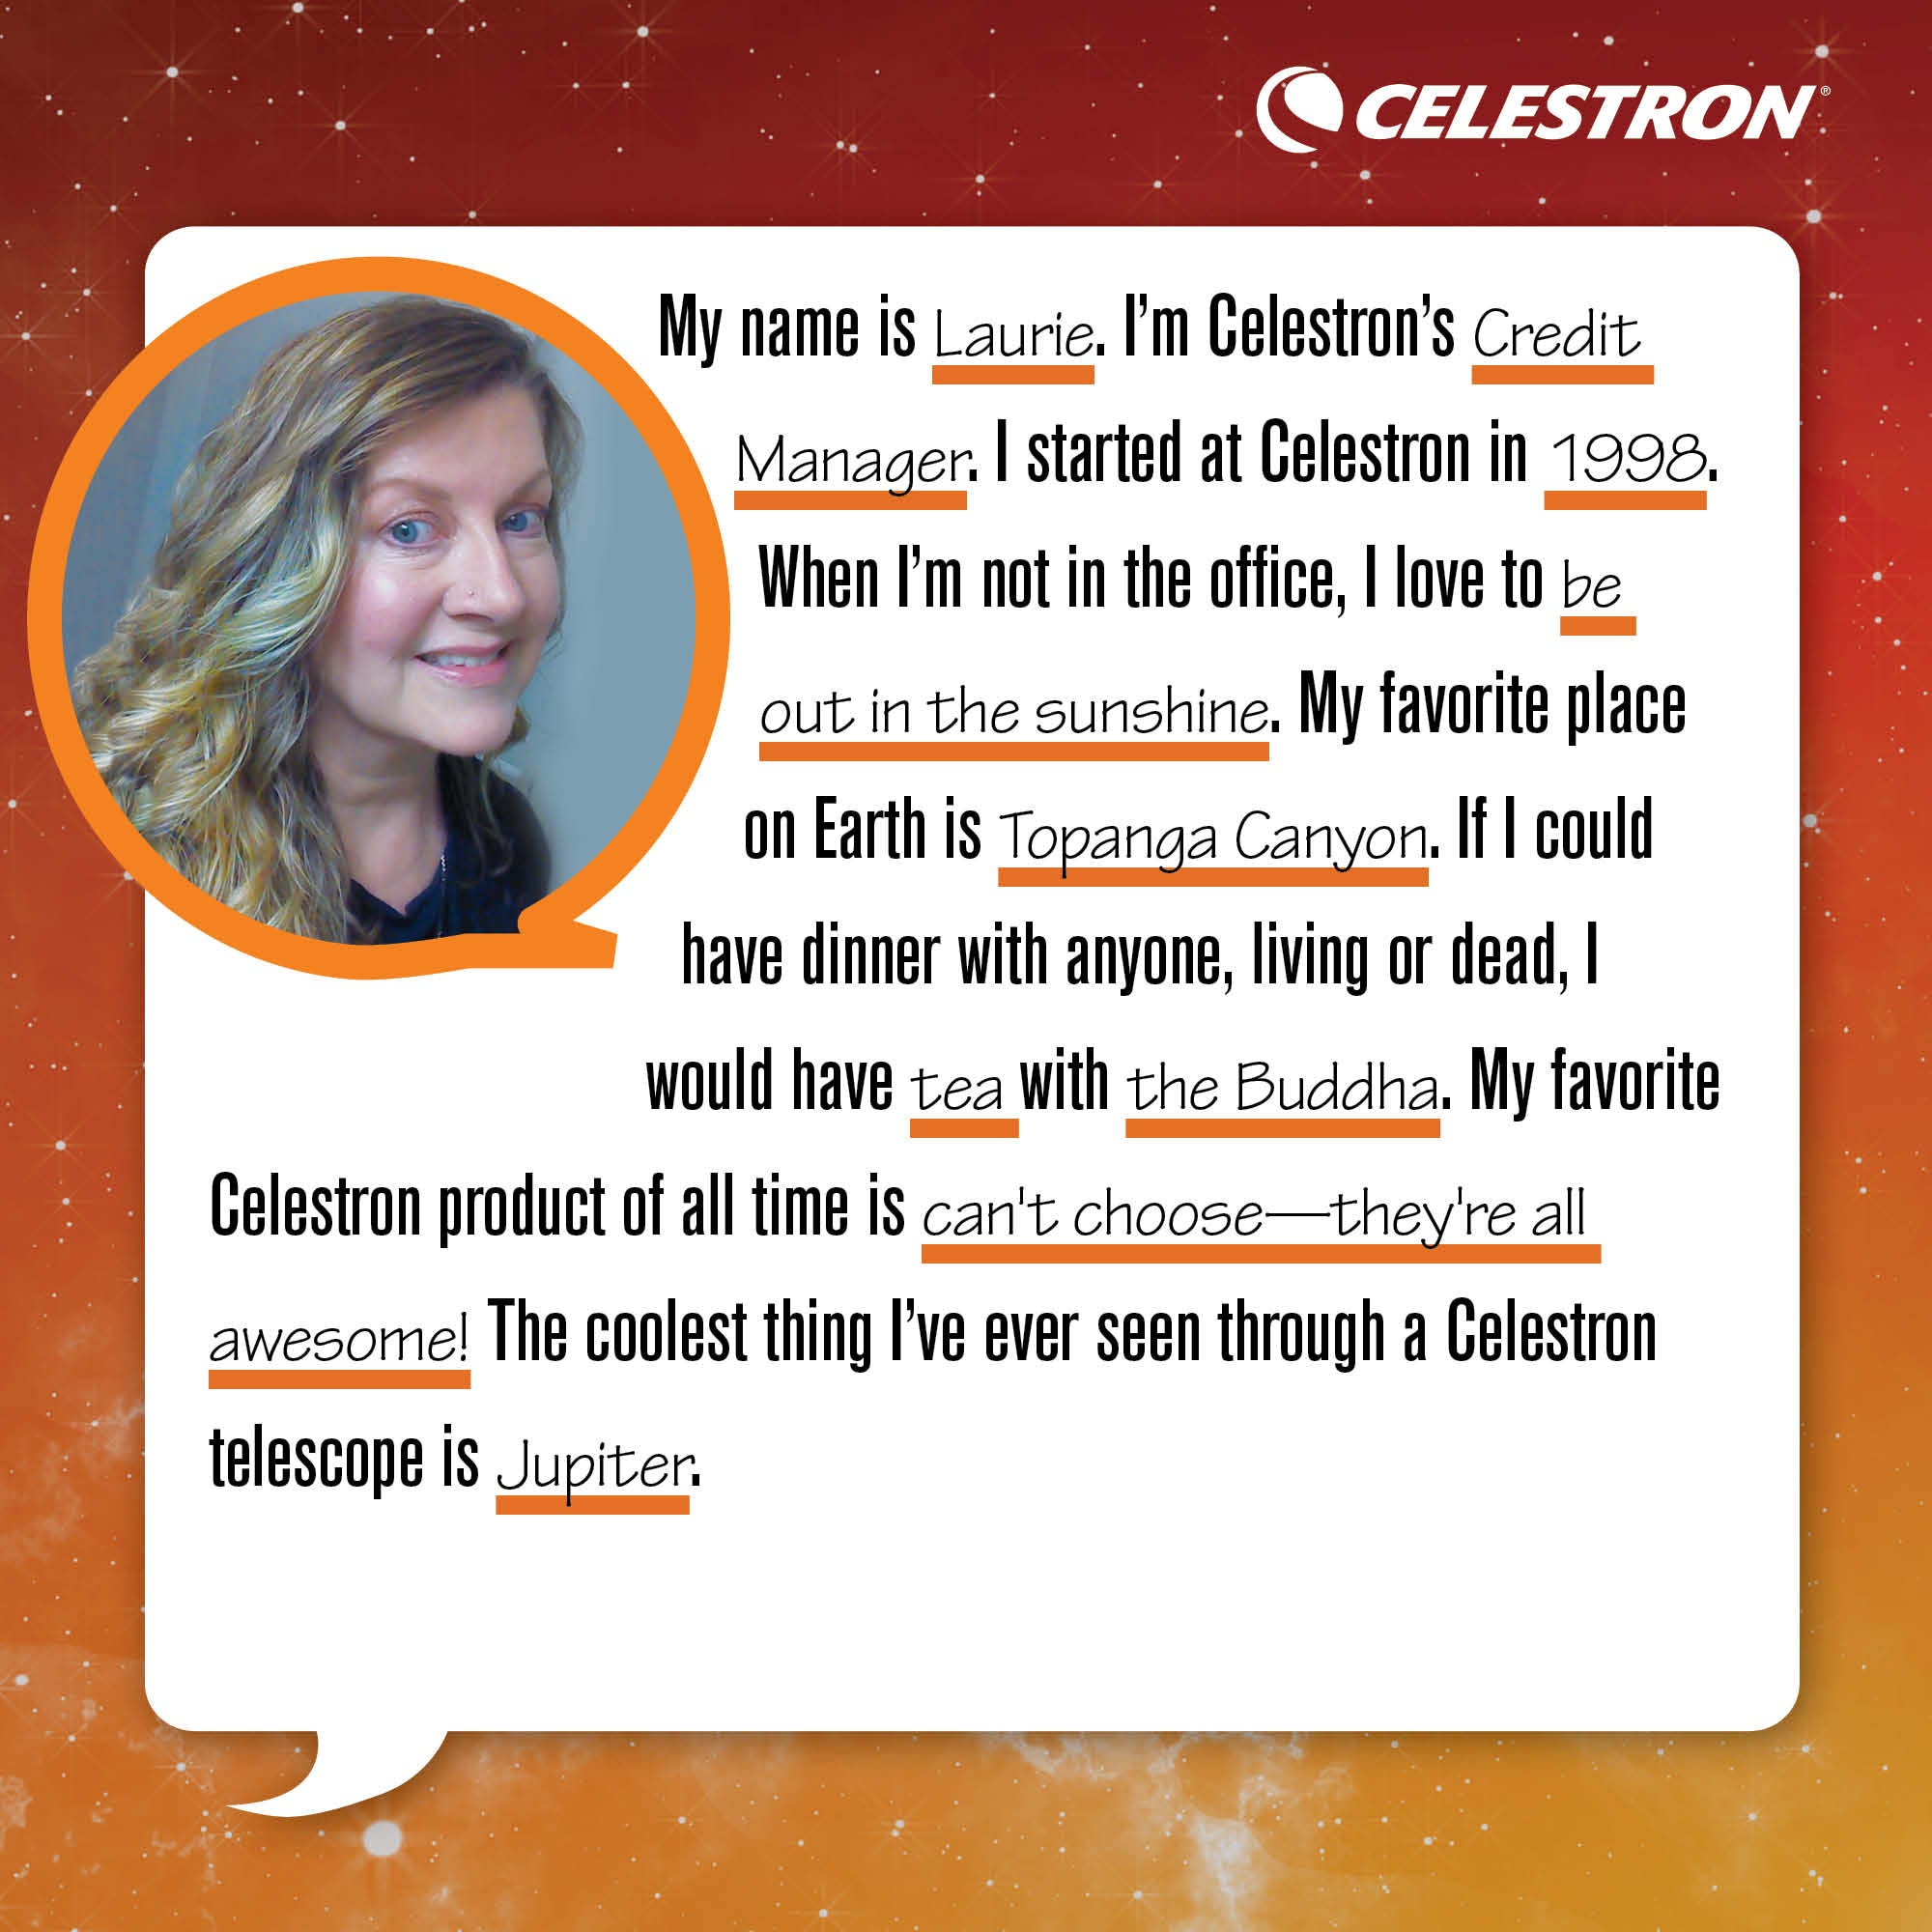 My name is Laurie. I'm Celestron's Credit Manager. I started at Celestron in 1998. When I'm not in the office, I love to be out in the sunshine.  My favorite place on Earth Topanga Canyon. If I could have dinner with anyone, living or dead, I would have tea with the Buddha. My favorite Celestron product of all time is can't choose - they're all awesome. The coolest thing I've ever seen through a Celestron telescope is the rings of Jupiter.